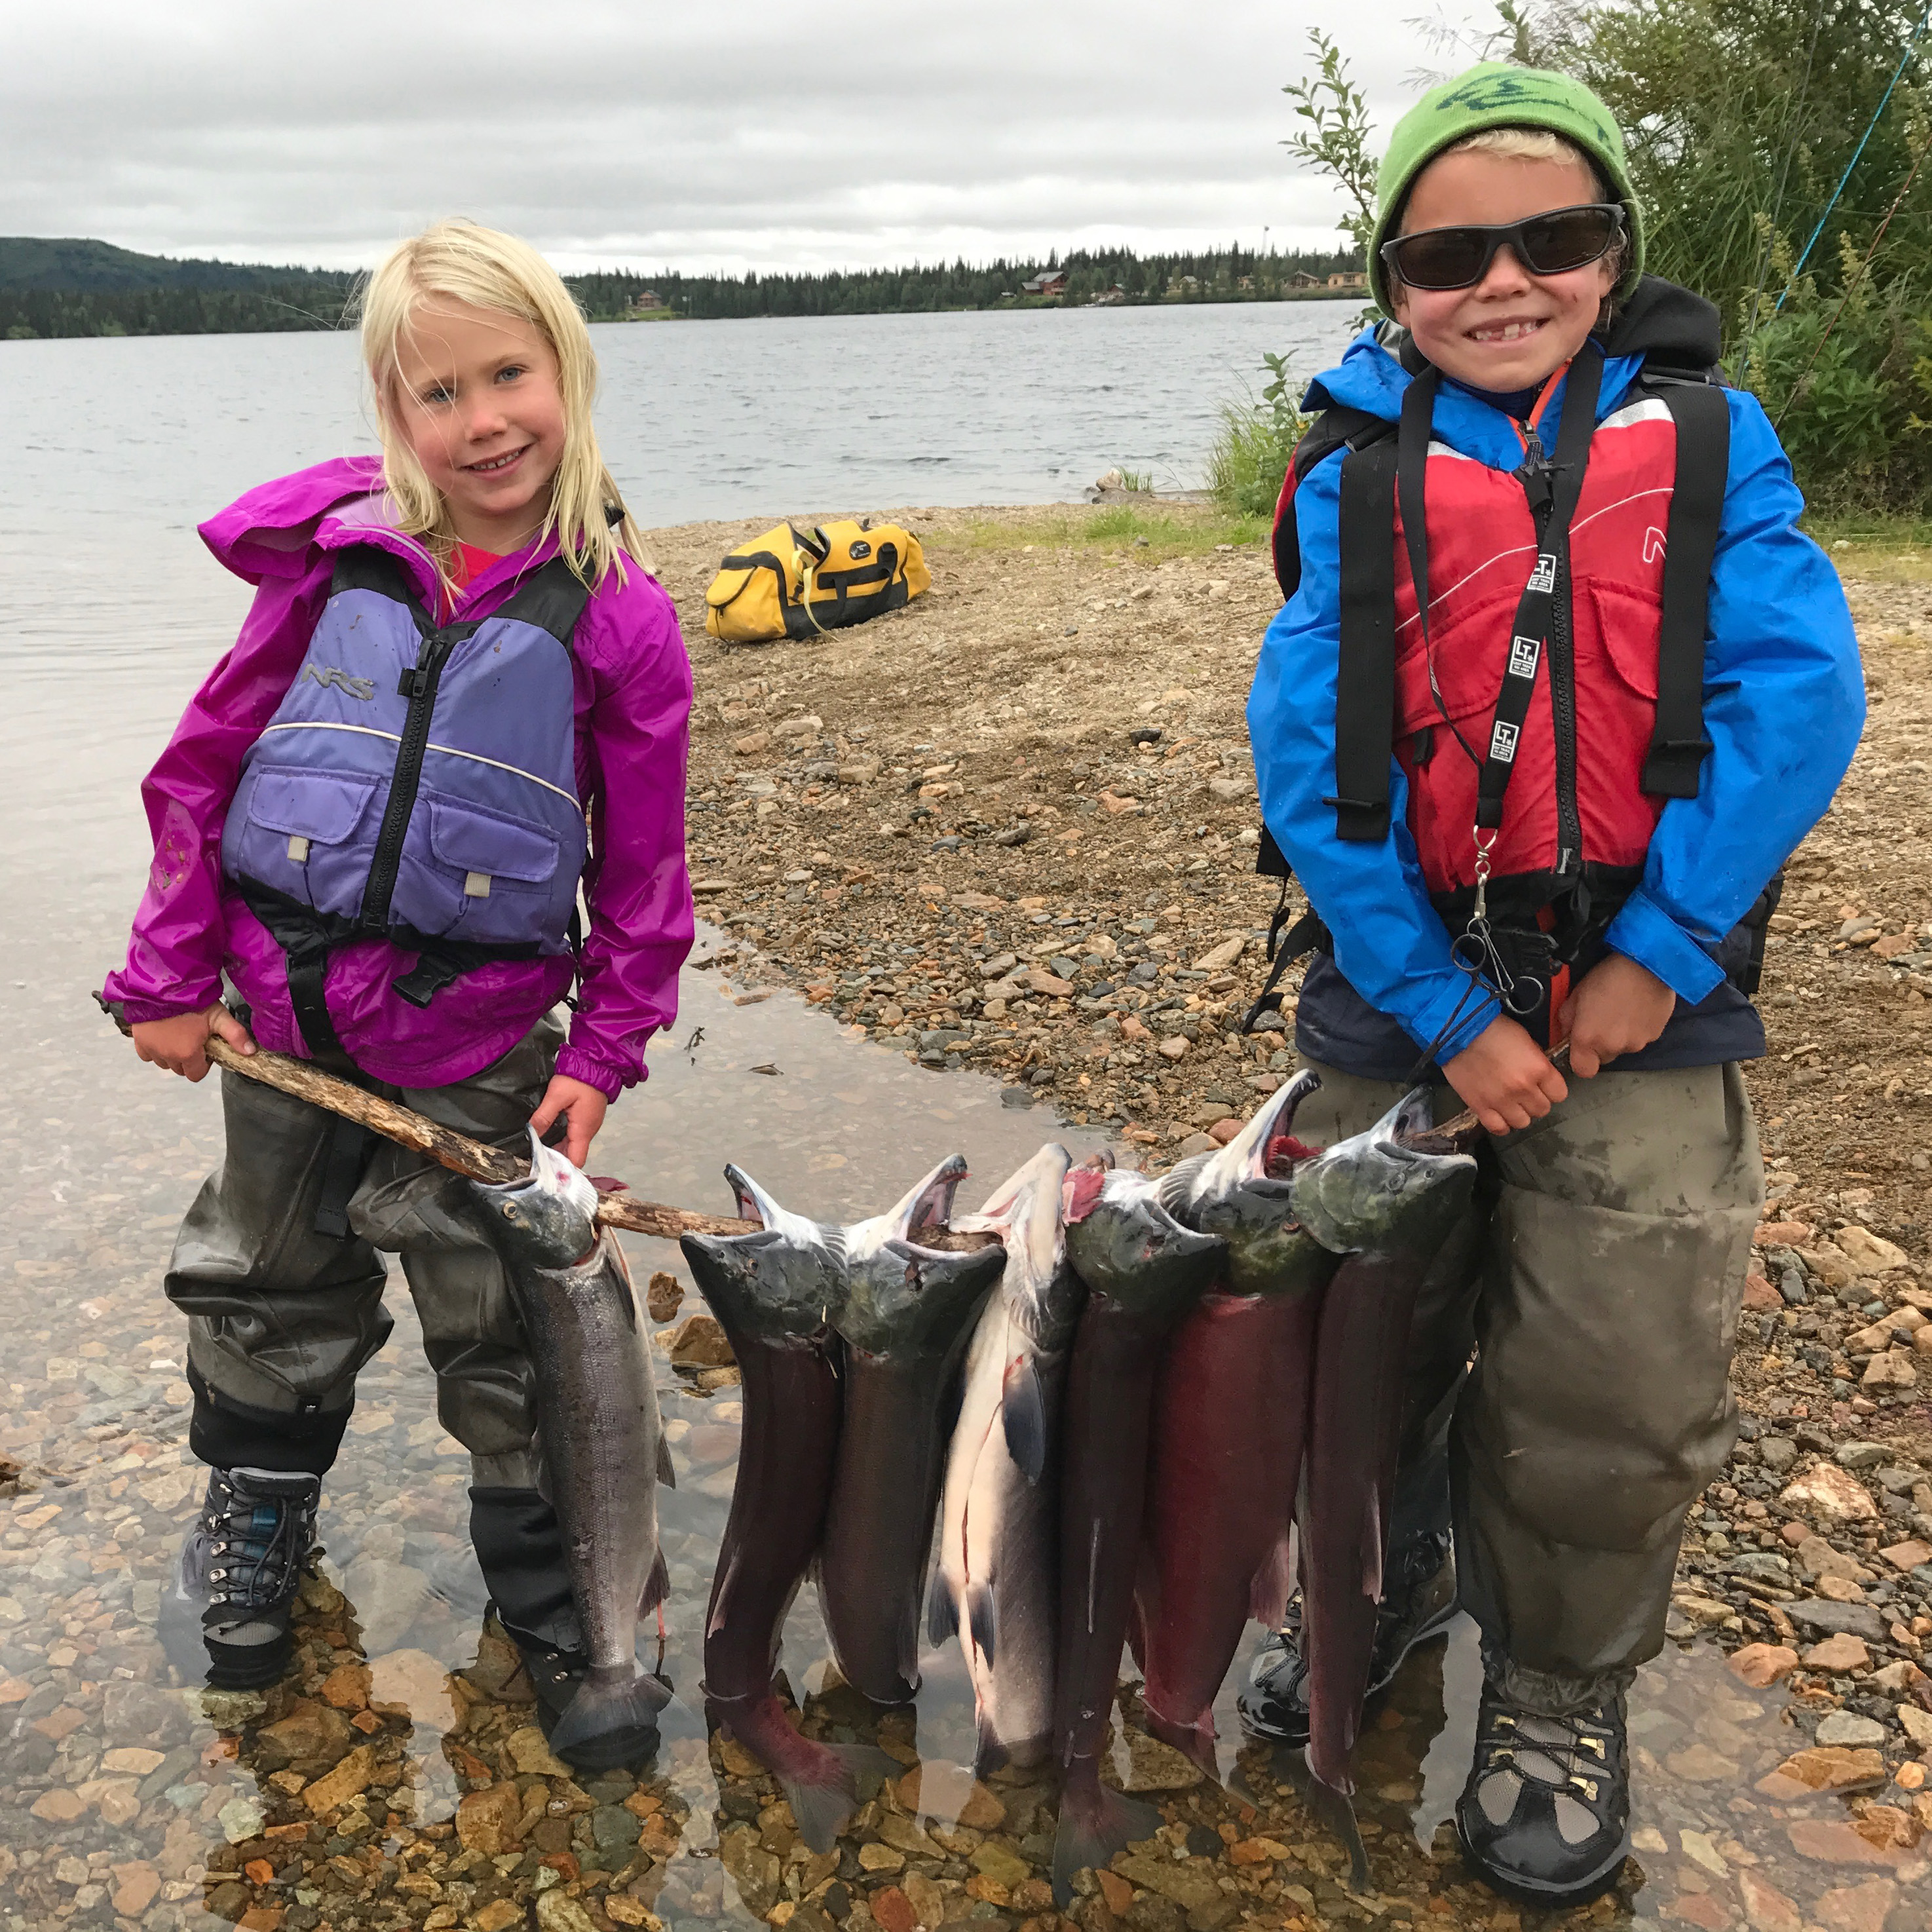 Best fishing trips: Children with fish by the river in Alaska